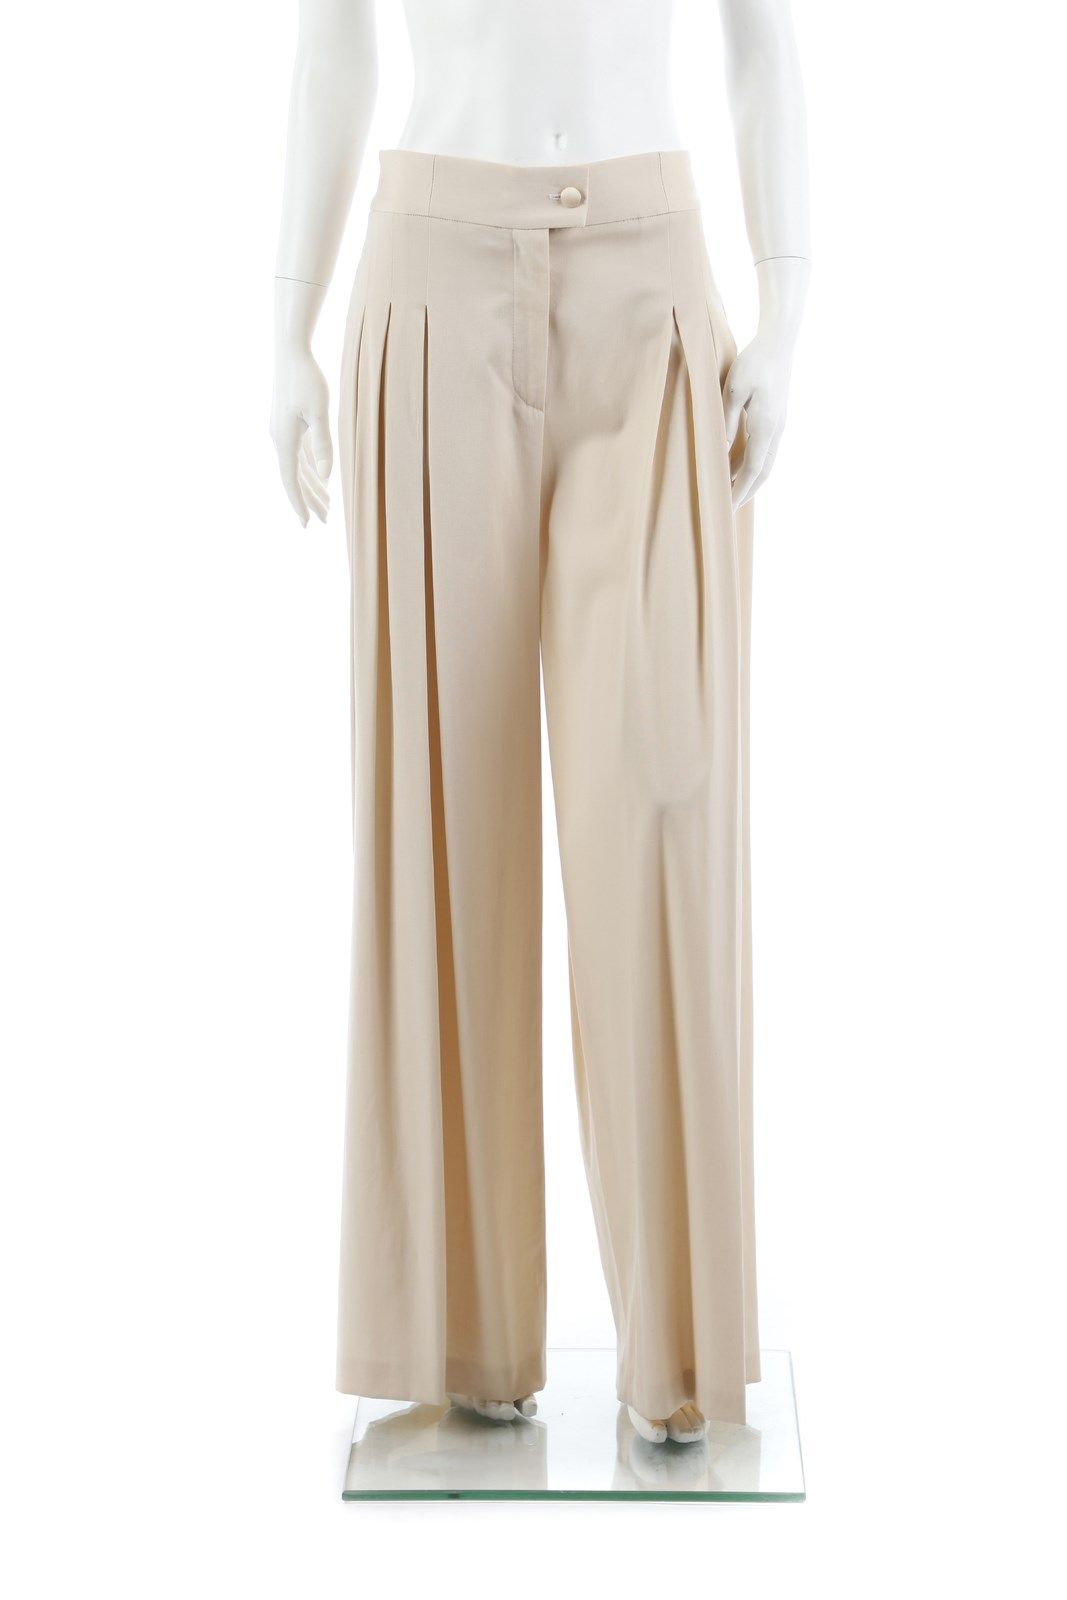 ANTONIO MARRAS White pleated palazzo trousers. Size 46IT. Made in Italy. Pantalo&hellip;